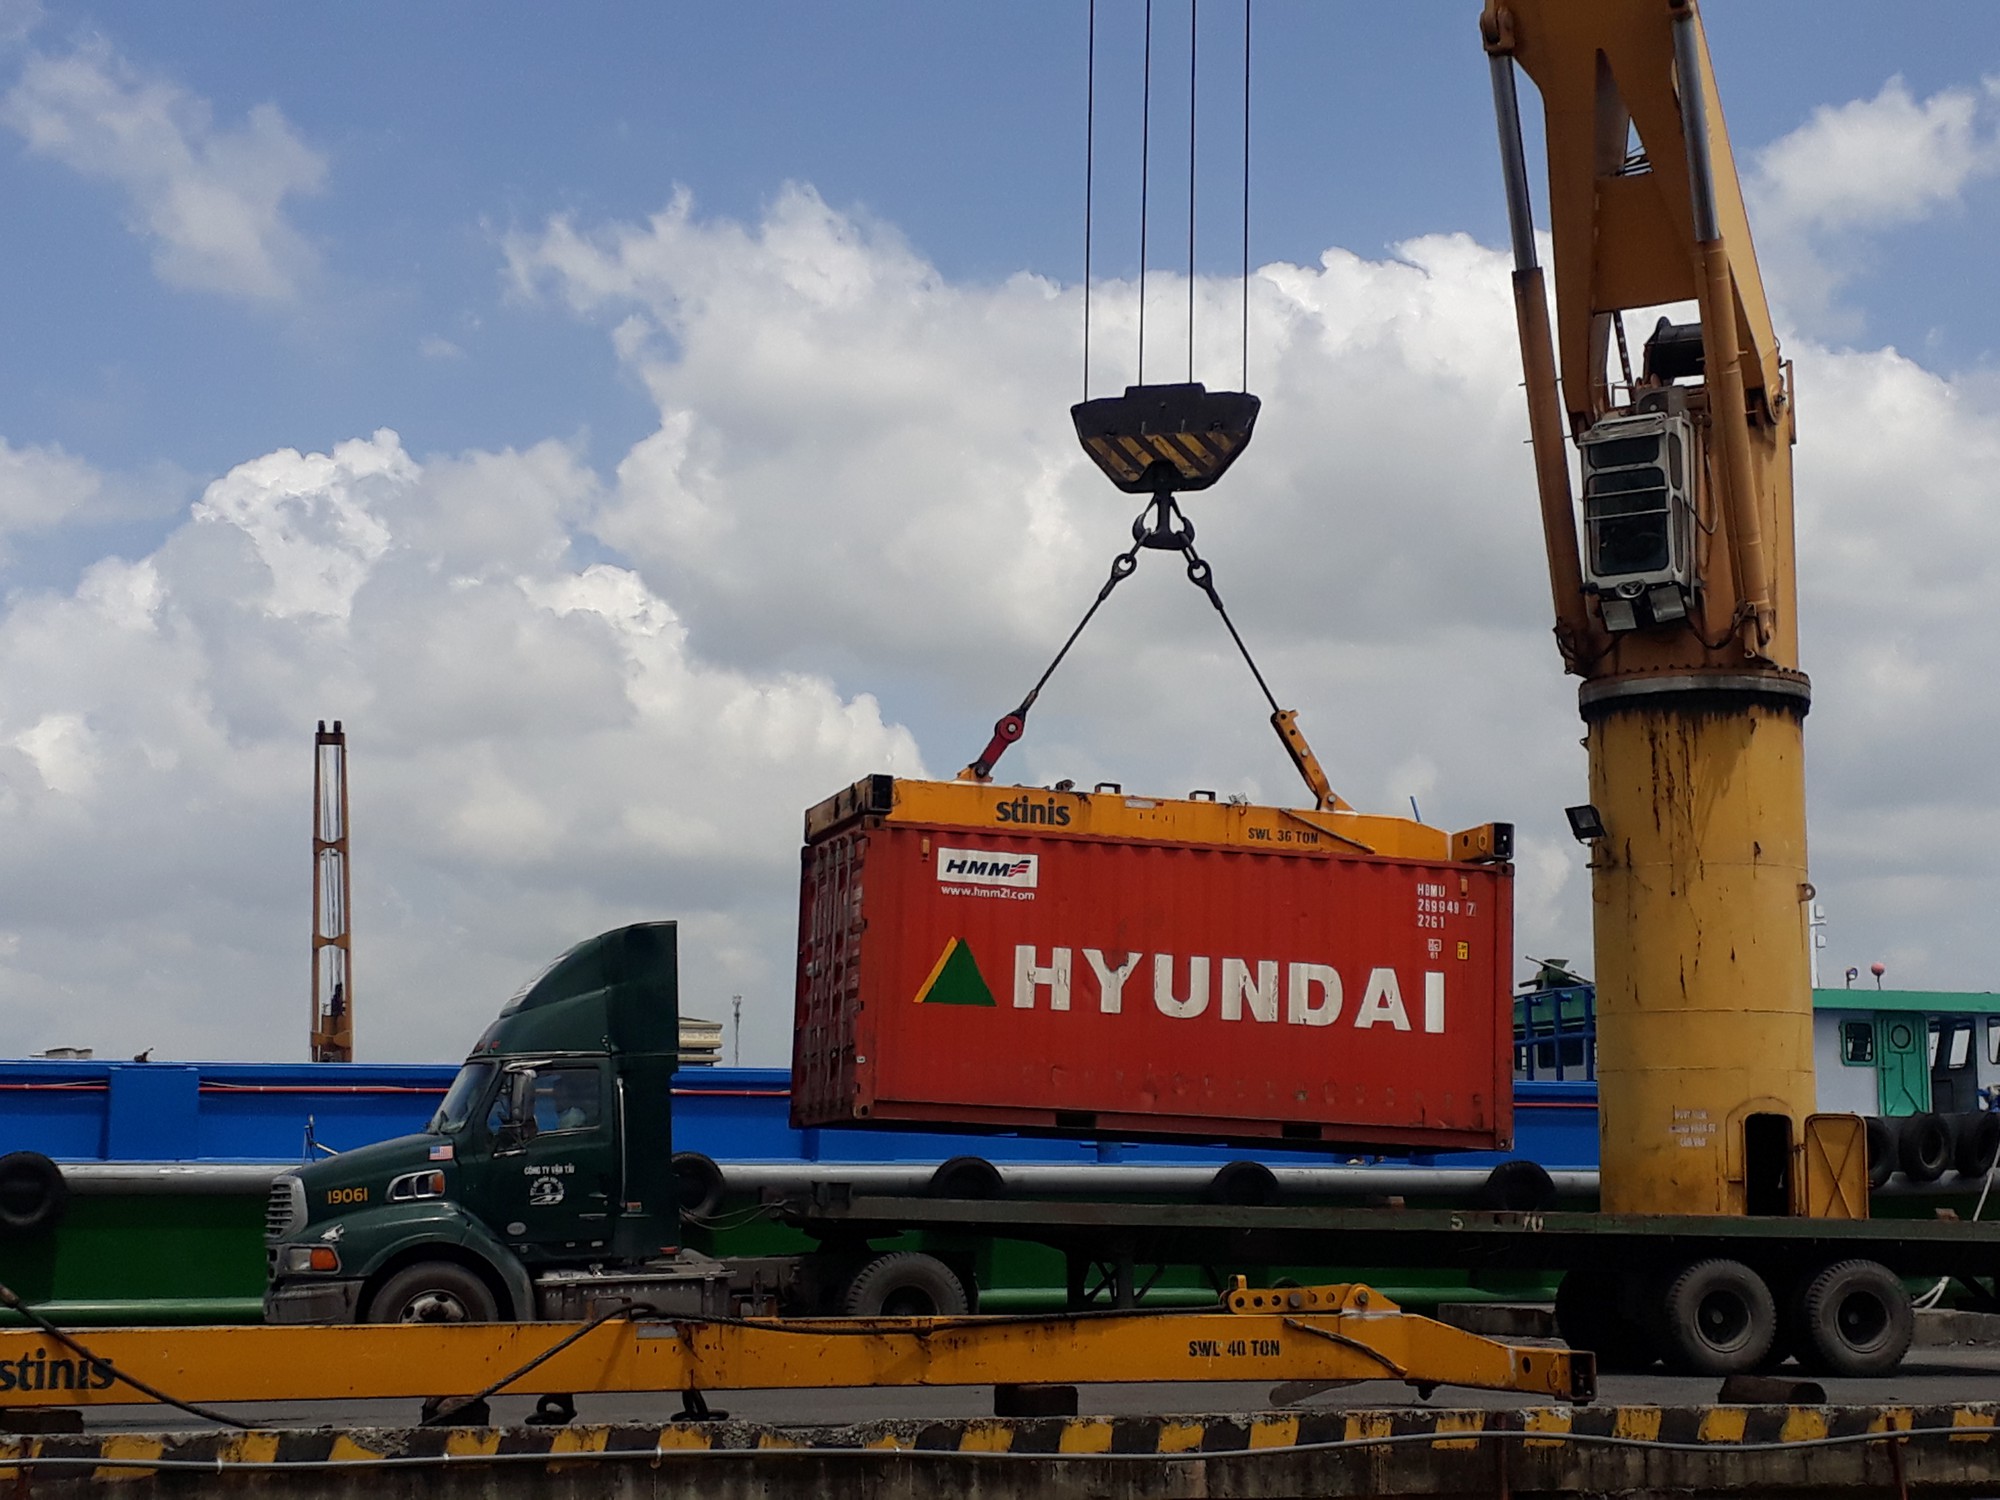 Vietnam re-exports 25 containers of Monazite concentrates to Russia over radioactive materials